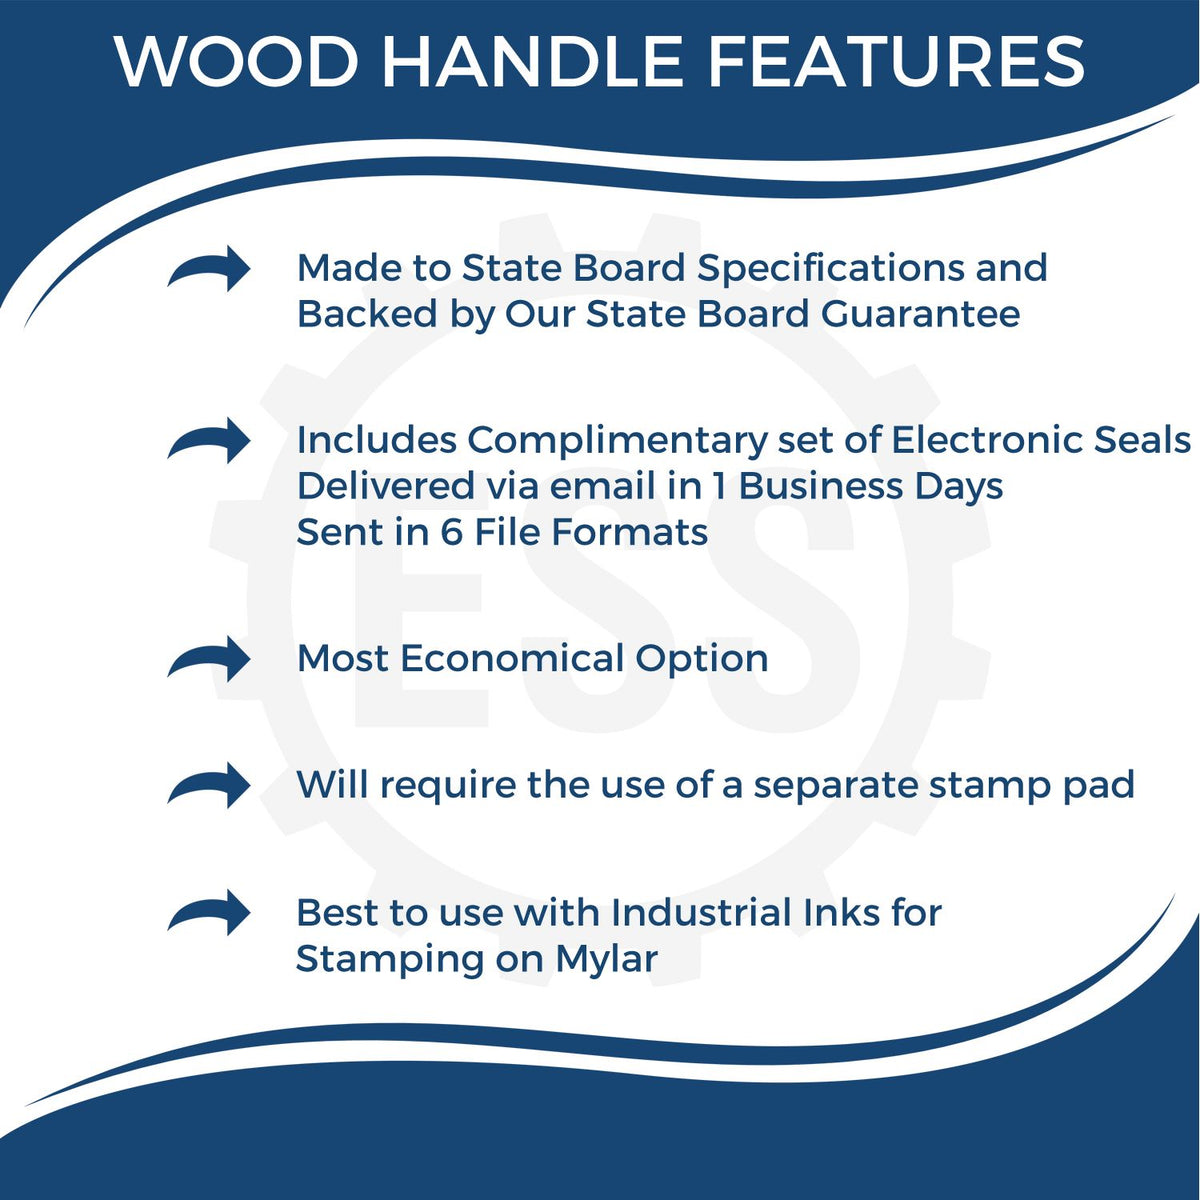 A picture of an infographic highlighting the selling points for the Wooden Handle Maryland Rectangular Notary Public Stamp